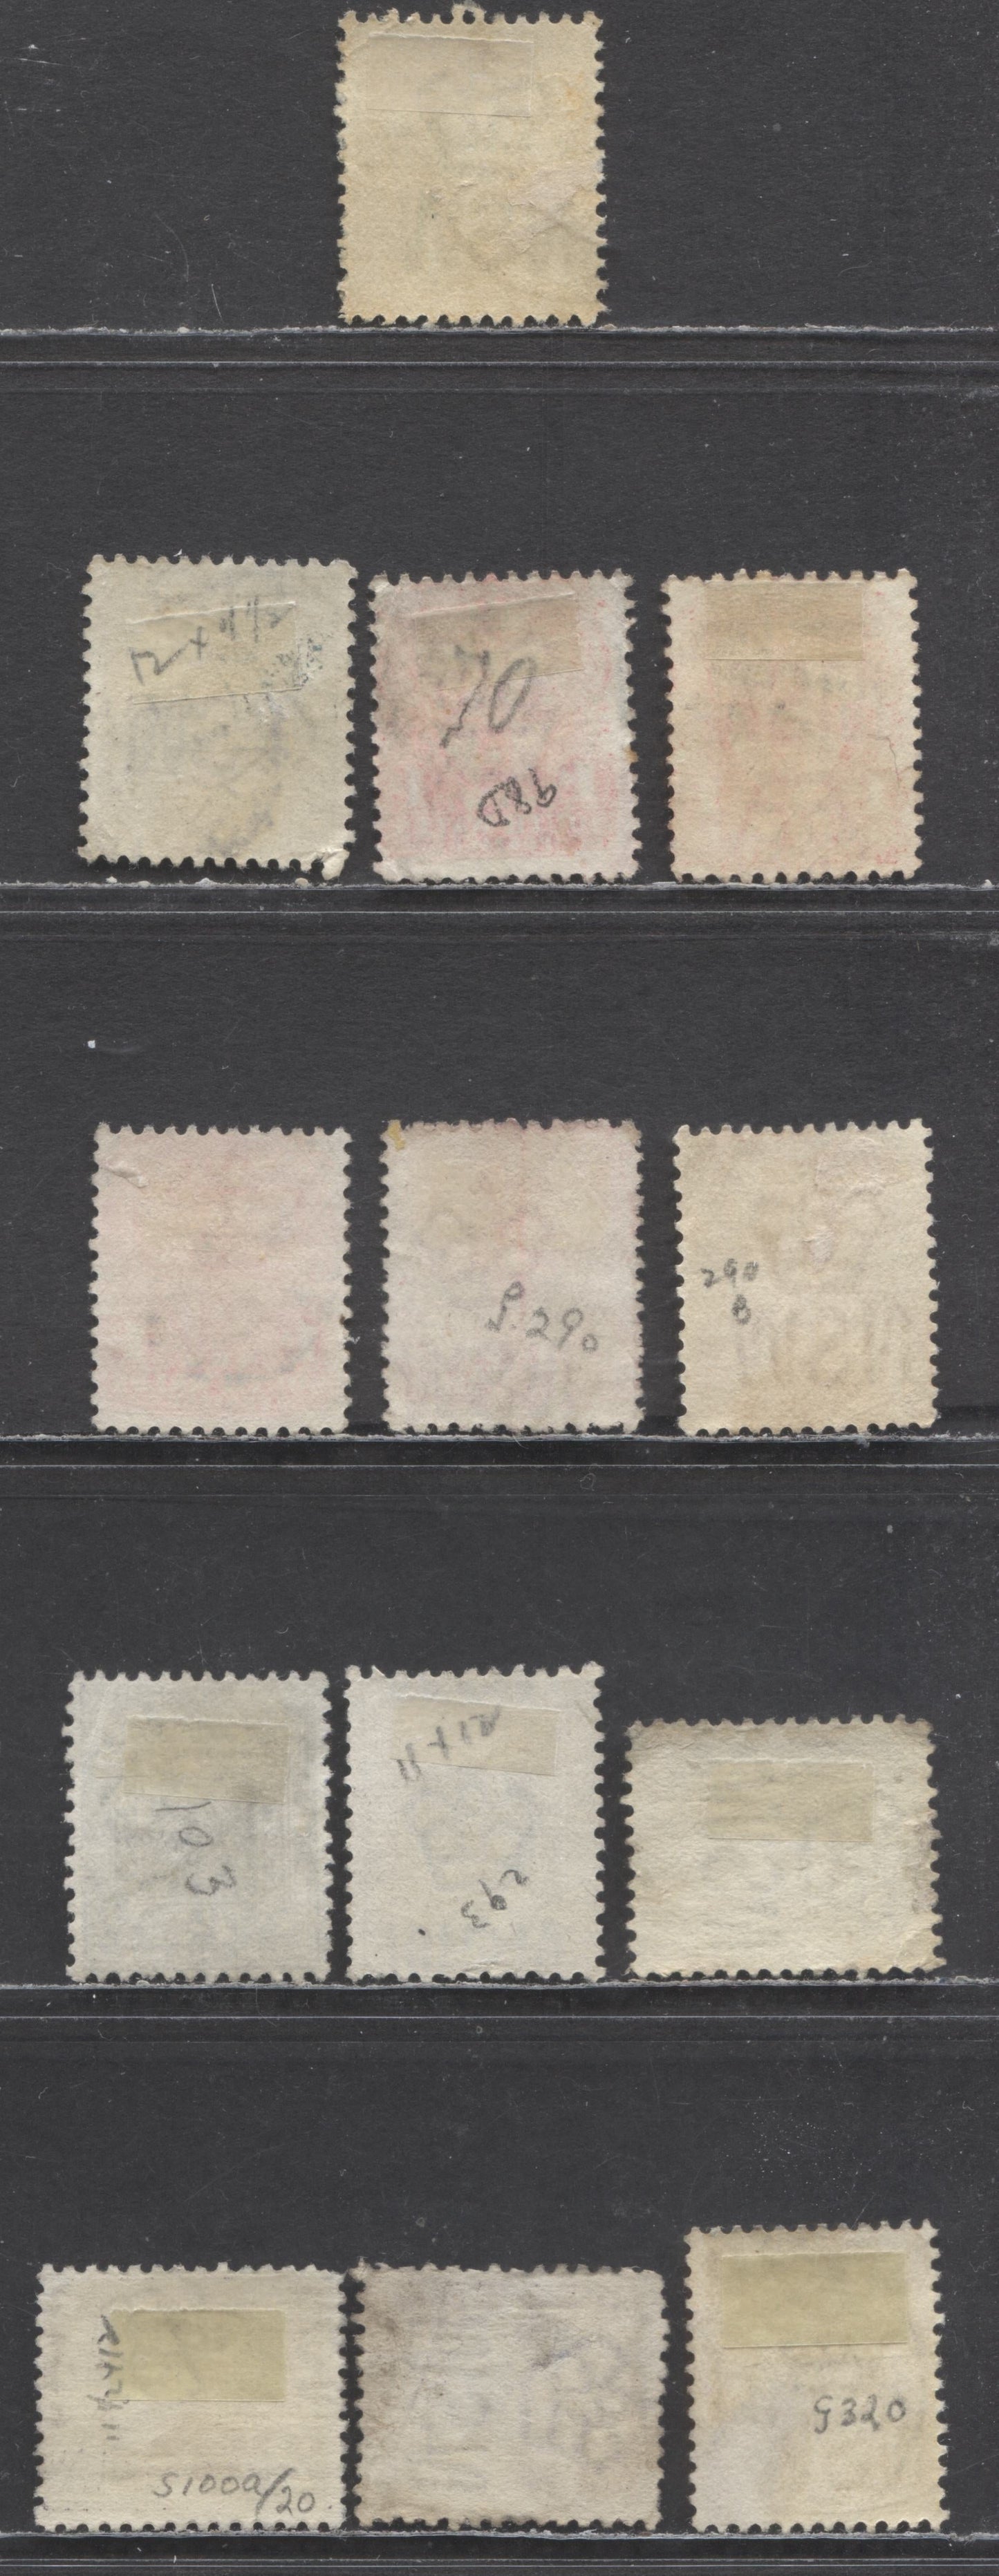 Lot 86 Australian States - New South Wales SC#98/106 1897-1899 Arms & Queen Victoria Issues, Most Listed Perfs & Dies, Large Crown & NSW Wmk, 13 Fine/Very Fine Used Singles, Estimated Value $10